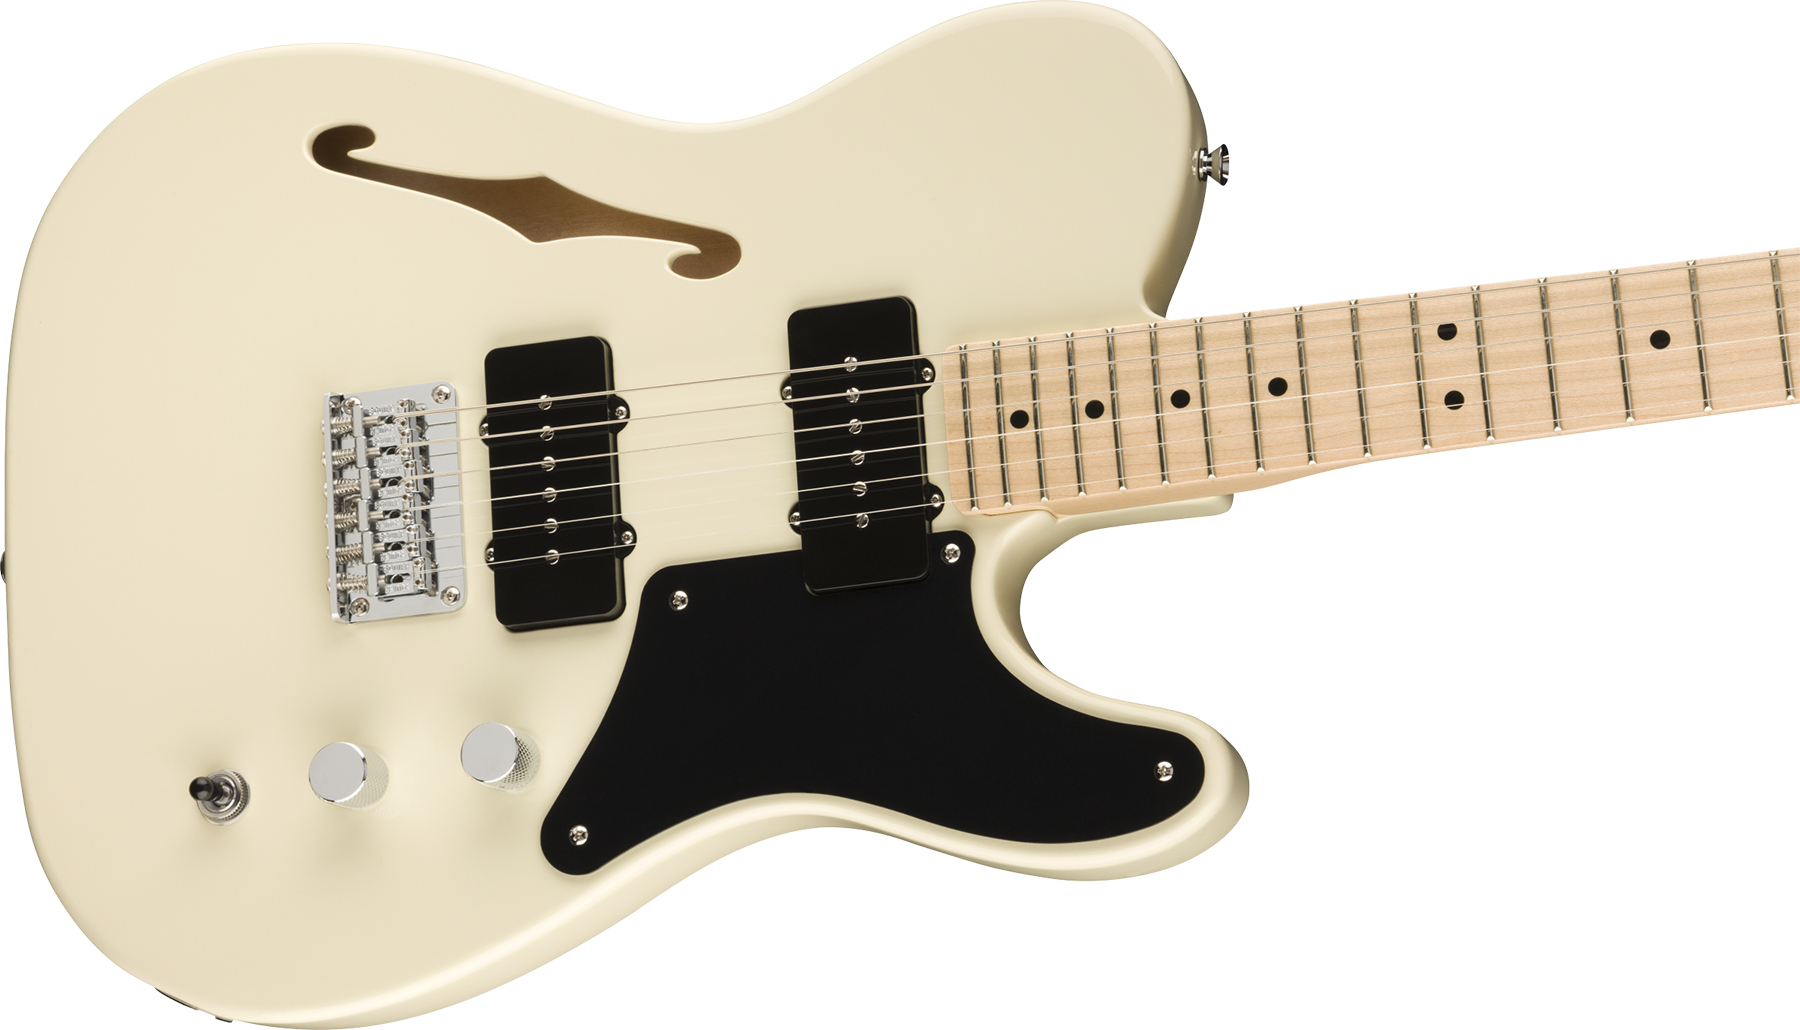 Squier Tele Thinline Cabronita Paranormal Ss Ht Mn - Olympic White - Guitare Électrique Forme Tel - Variation 2